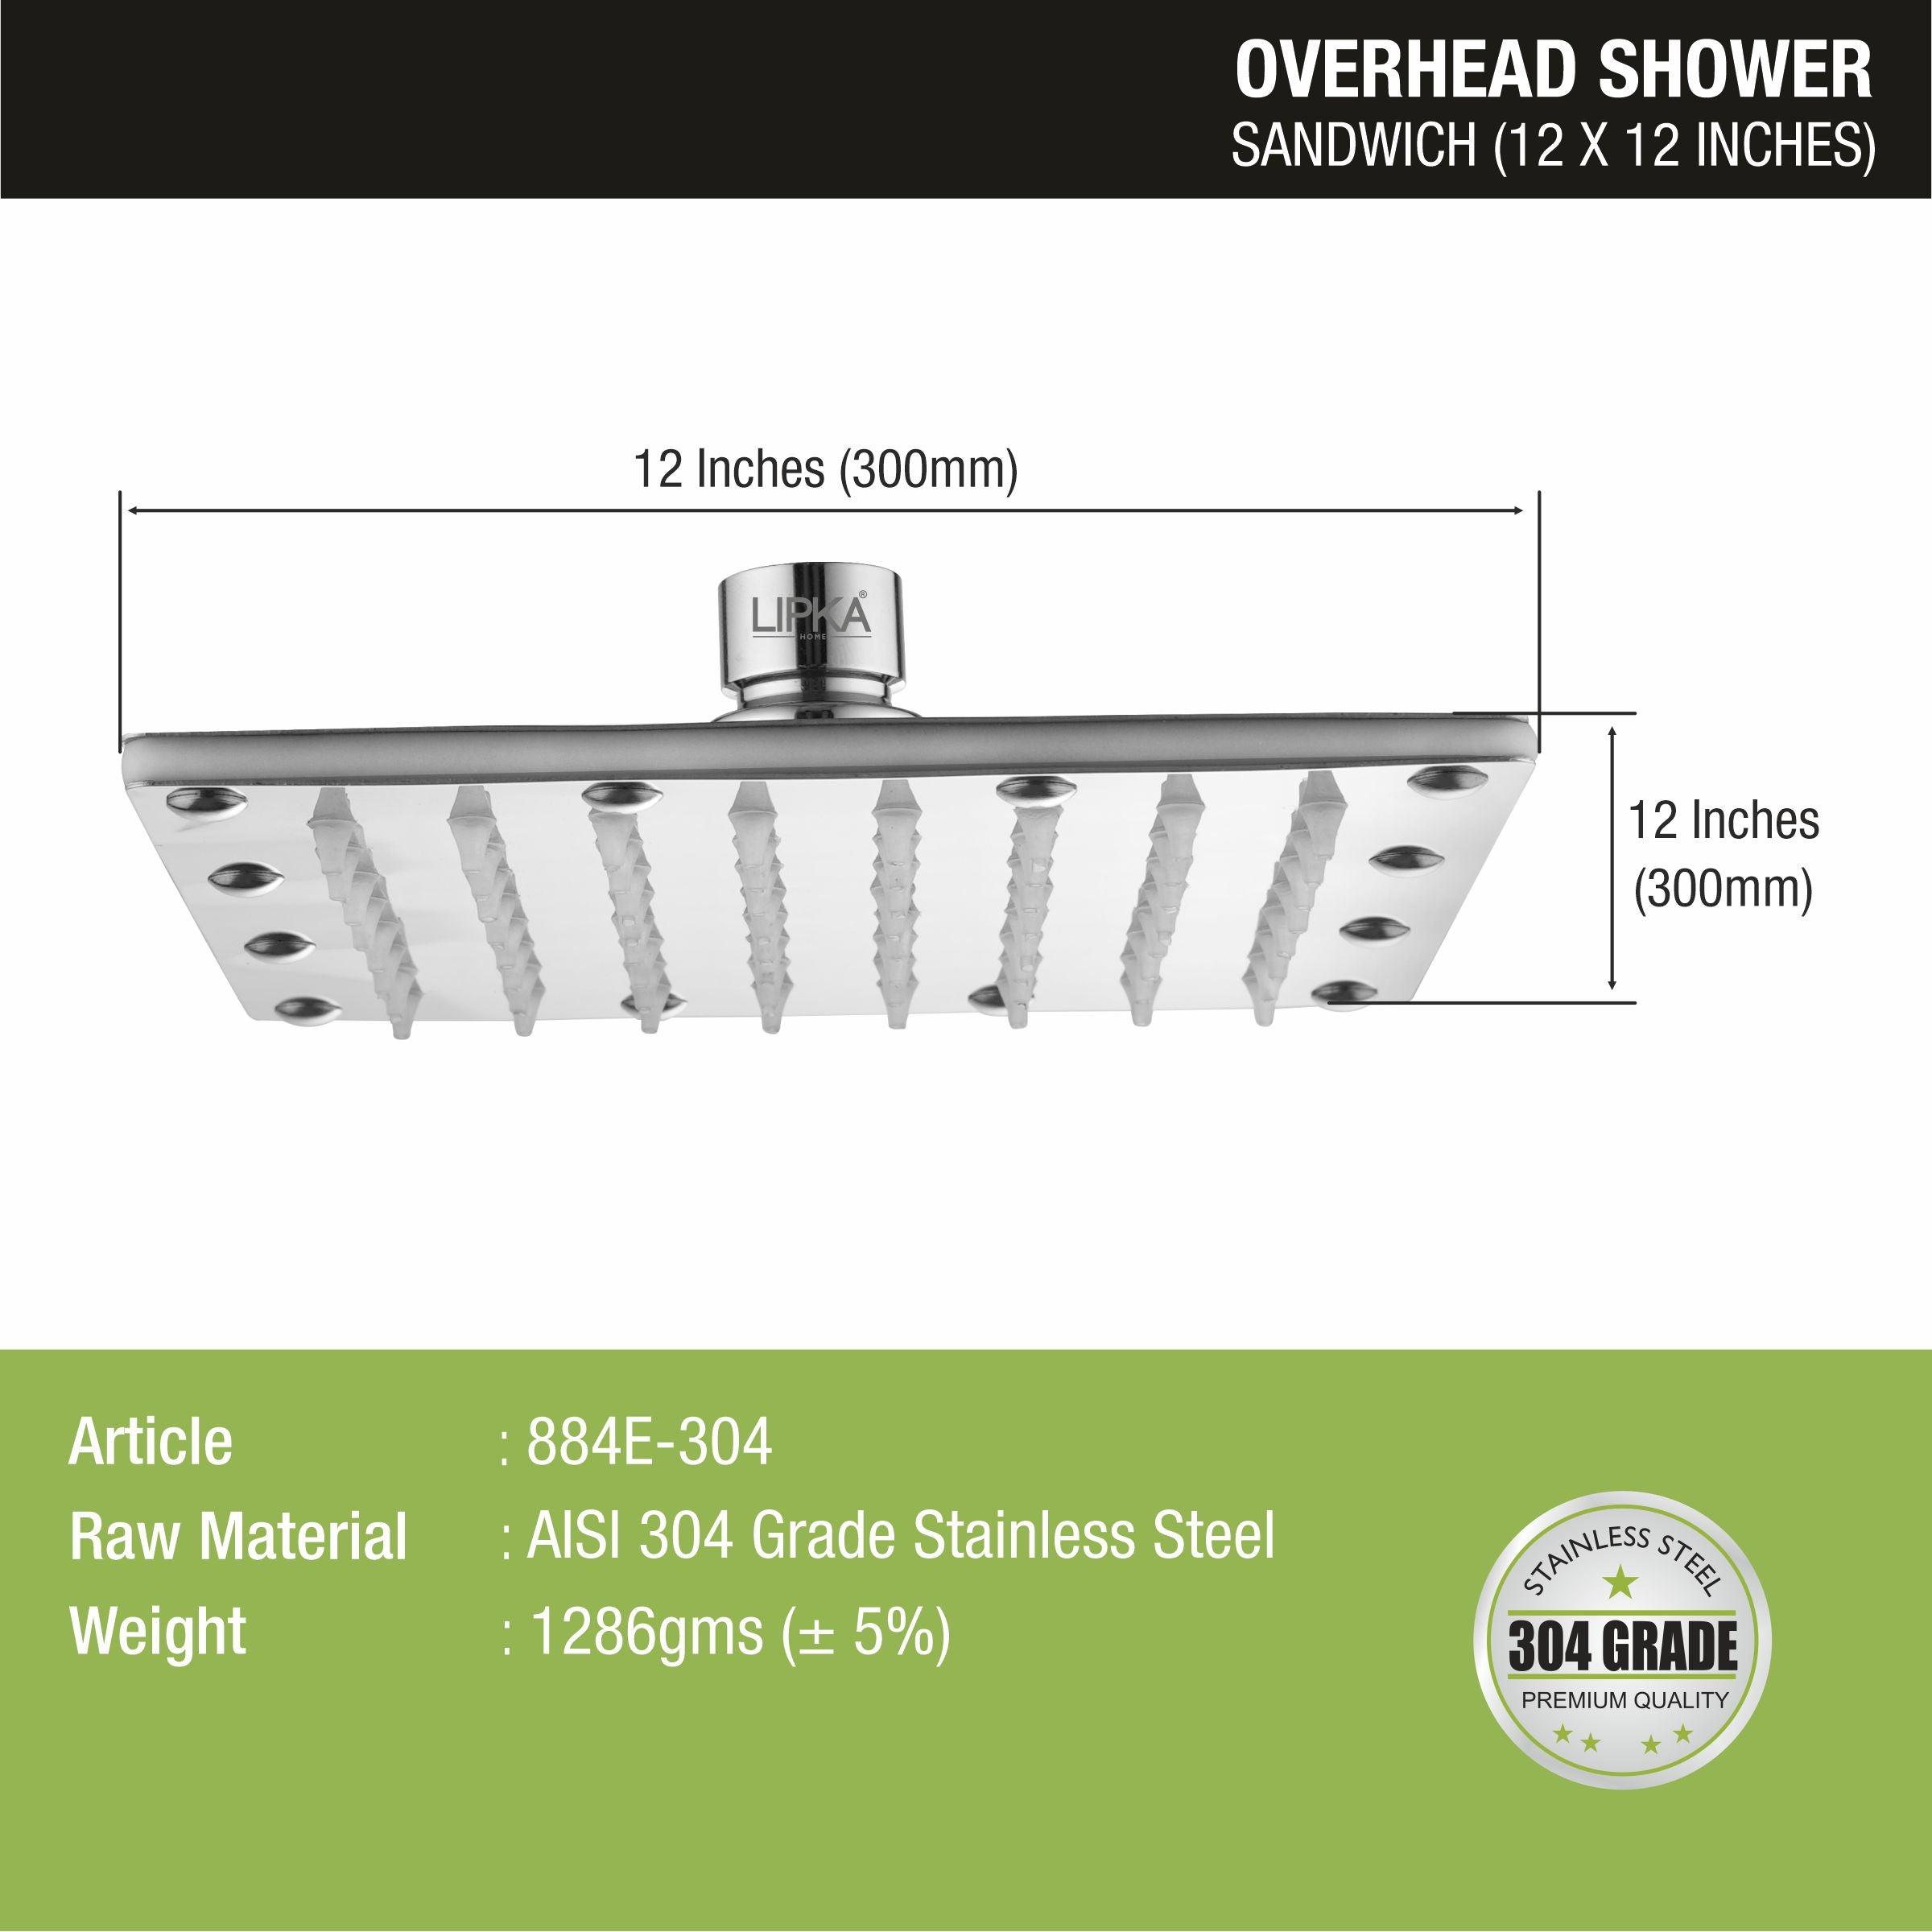 Sandwich 304-Grade Overhead Rain Shower (12 x 12 Inches) dimensions and sizes